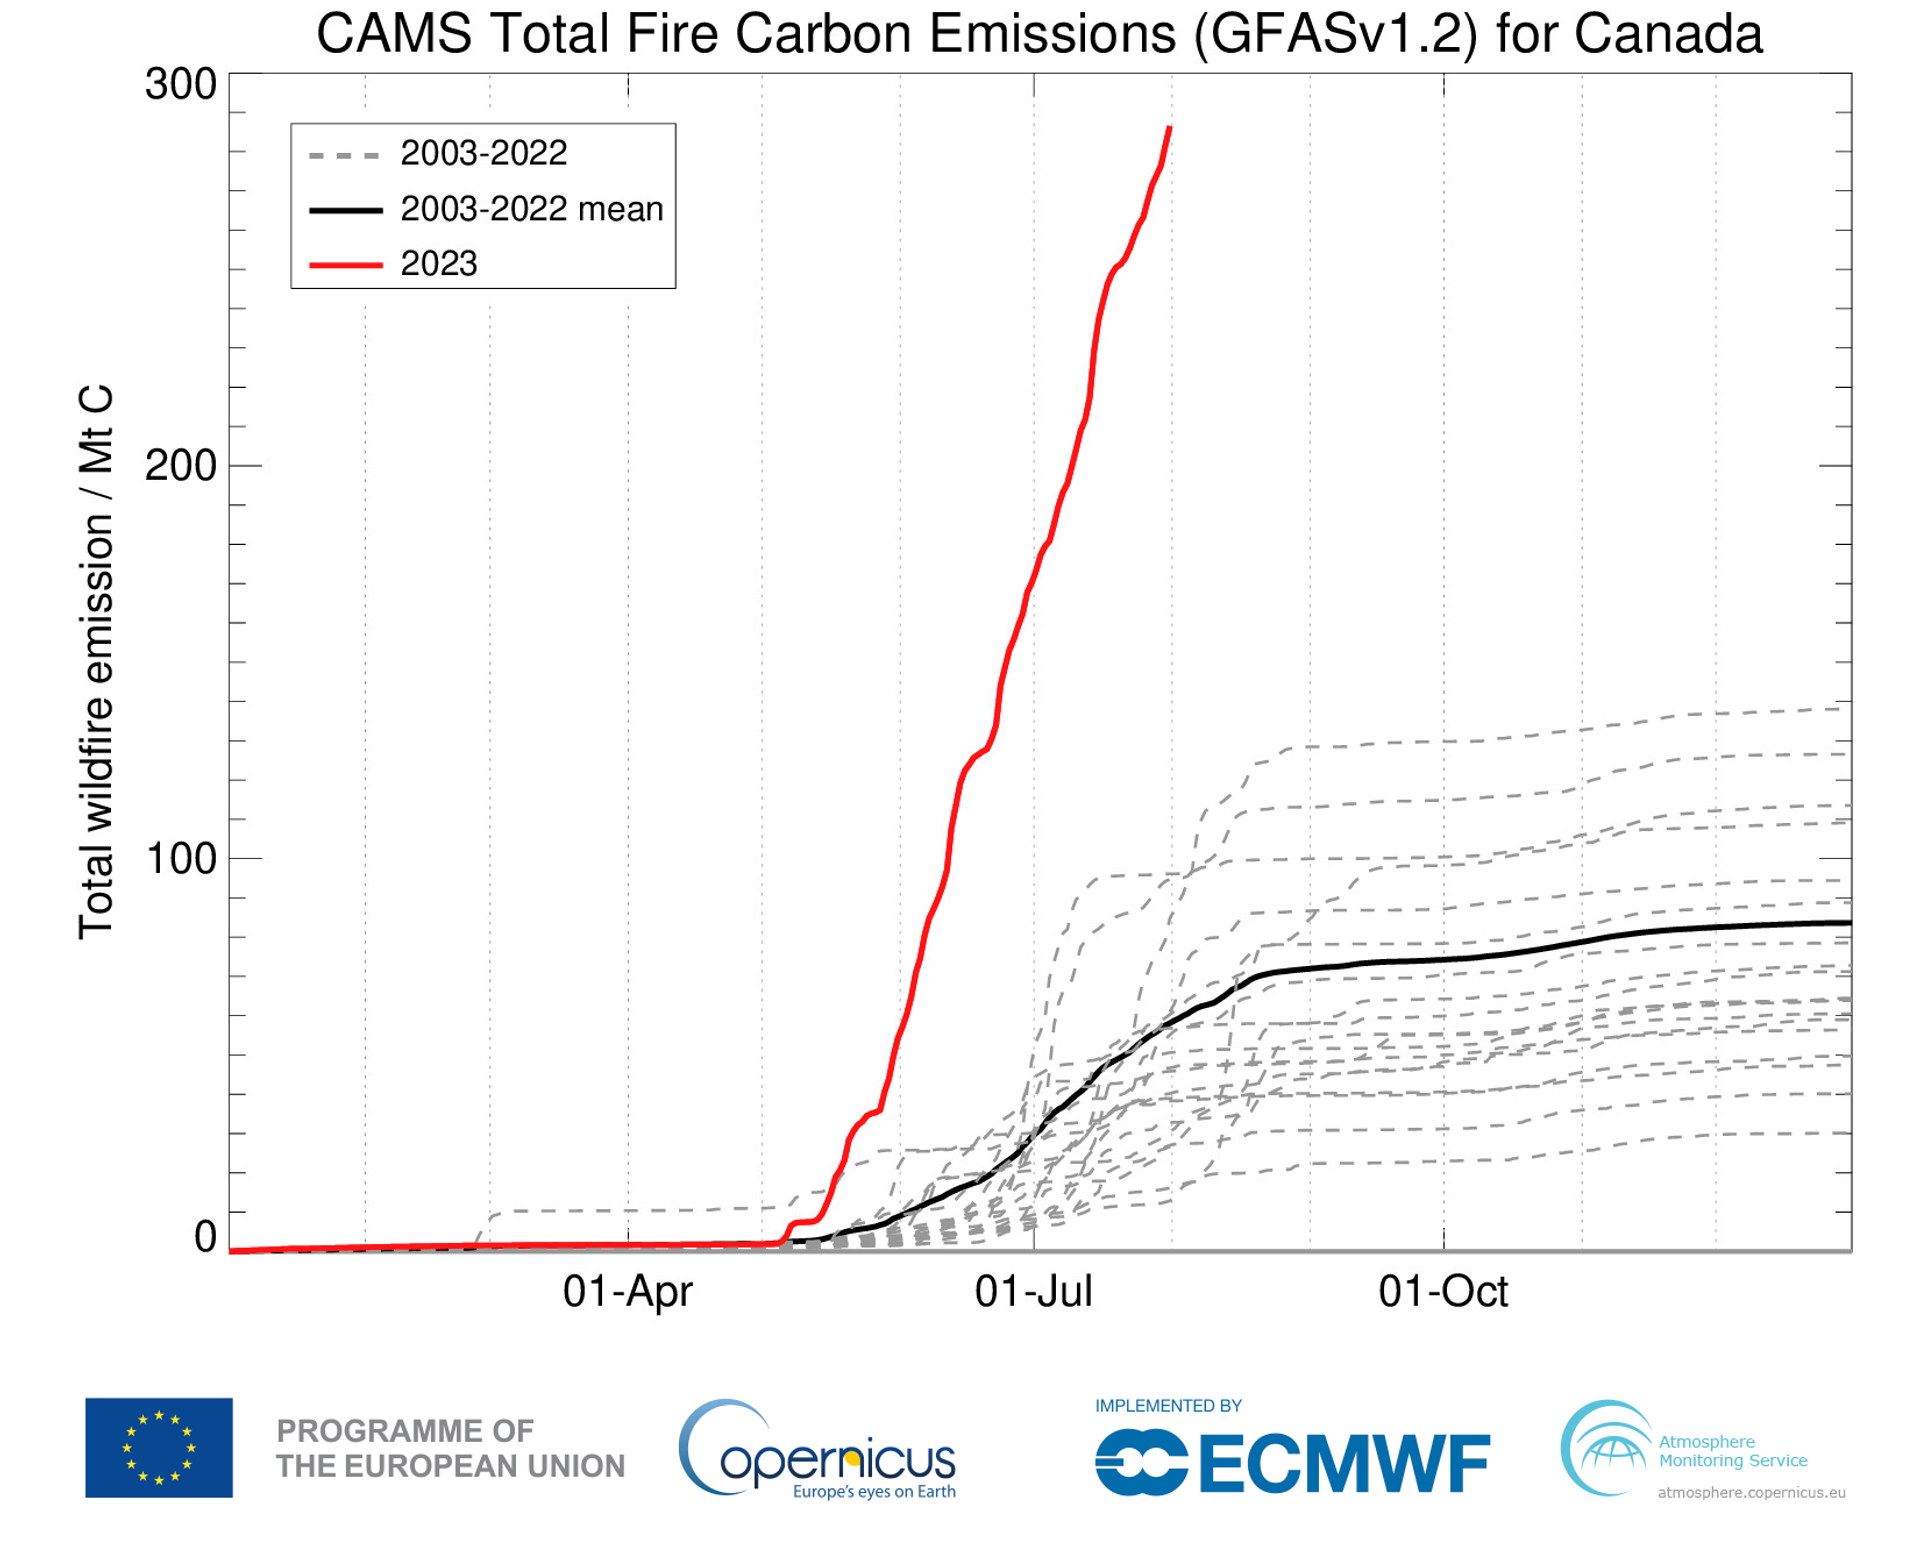 The Canadian wildfires have put twice the amount of carbon into the atmosphere in the first seven months of 2023 as all of Canada did in 2022. GFASV1.2 daily total cumulative estimated carbon emissions for Canada since 1 January (red line shows 2023 up to 1 August, thick black line shows 2003-2022 mean, and grey dashed lines show the other years in the dataset). - Sputnik International, 1920, 03.08.2023